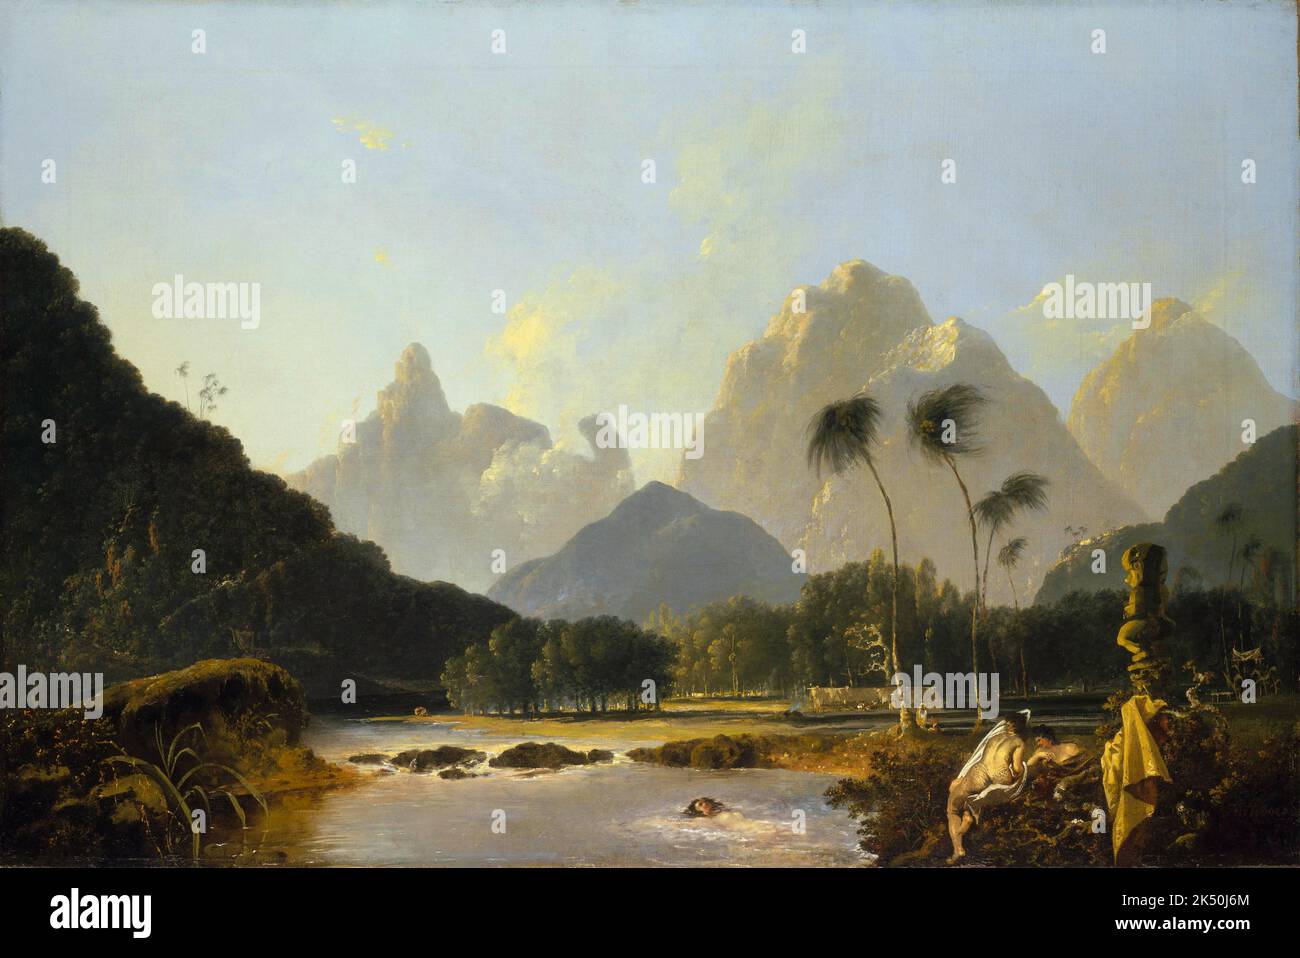 Tahiti: 'A View Taken in the Bay of Oaite Peha, Otaheite (Tahiti Revisited)'. Oil on canvas painting by William Hodges (28 October 1744 - 6 March 1797), c. 1776.  William Hodges was an English painter. He was a member of James Cook's second voyage to the Pacific Ocean, and is best known for the sketches and paintings of locations he visited on that voyage, including Table Bay, Tahiti, Easter Island, and the Antarctic. Hodges accompanied Cook to the Pacific as the expedition's artist in 1772-1775. Many of his sketches and wash paintings were adapted as engravings in Cook's published journals. Stock Photo